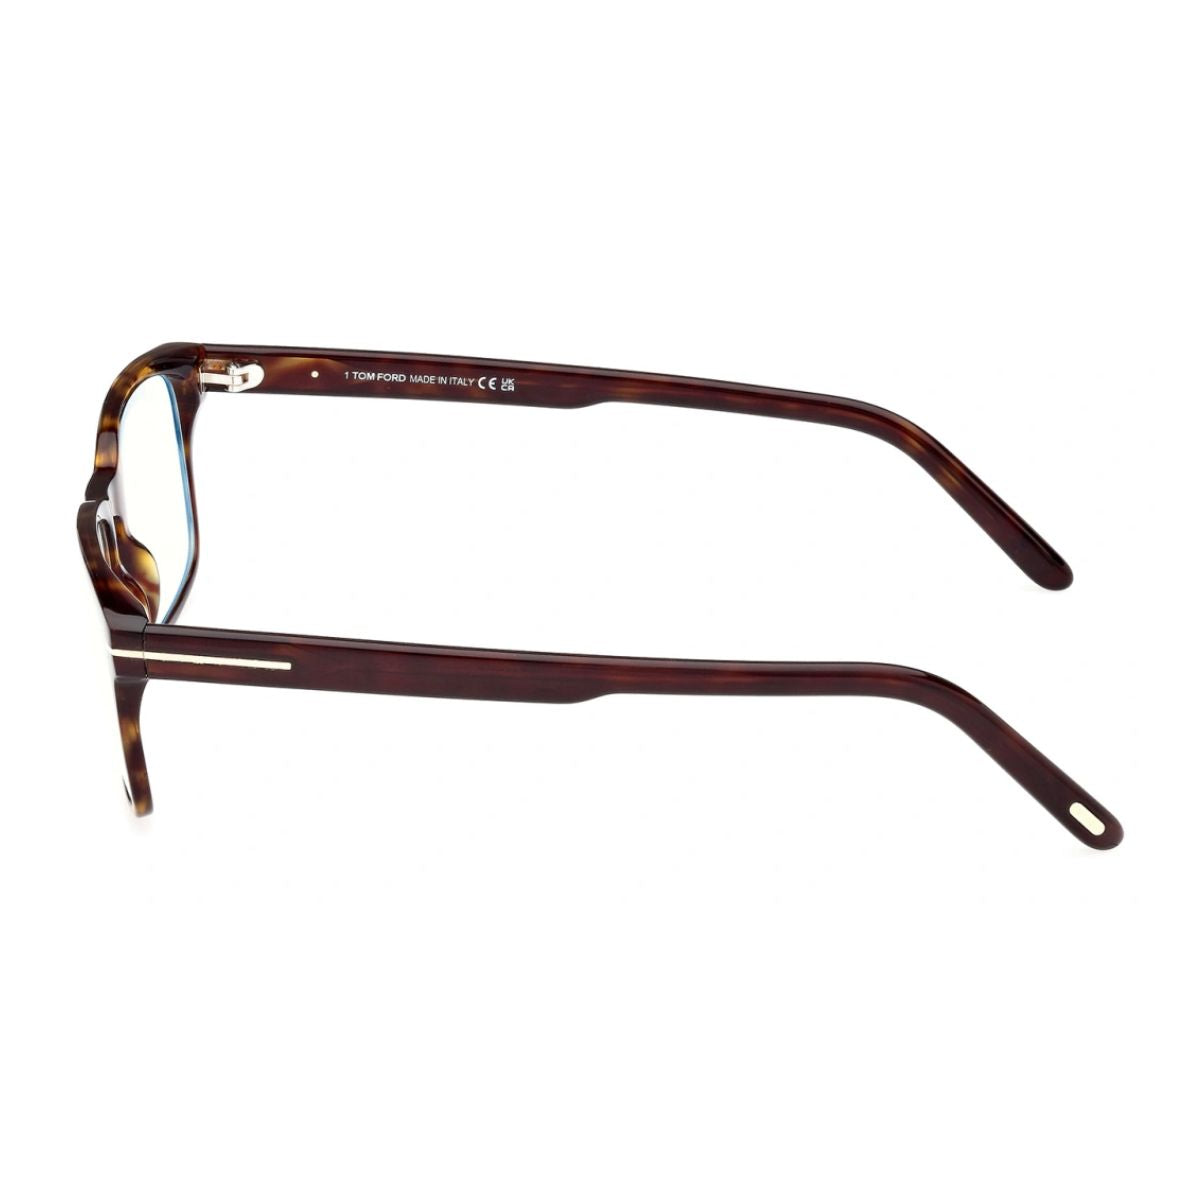 "Men's optical glasses by Tom Ford, model TF 5938 052, featuring a rectangular shape and Havana color, with free shipping from Optorium."